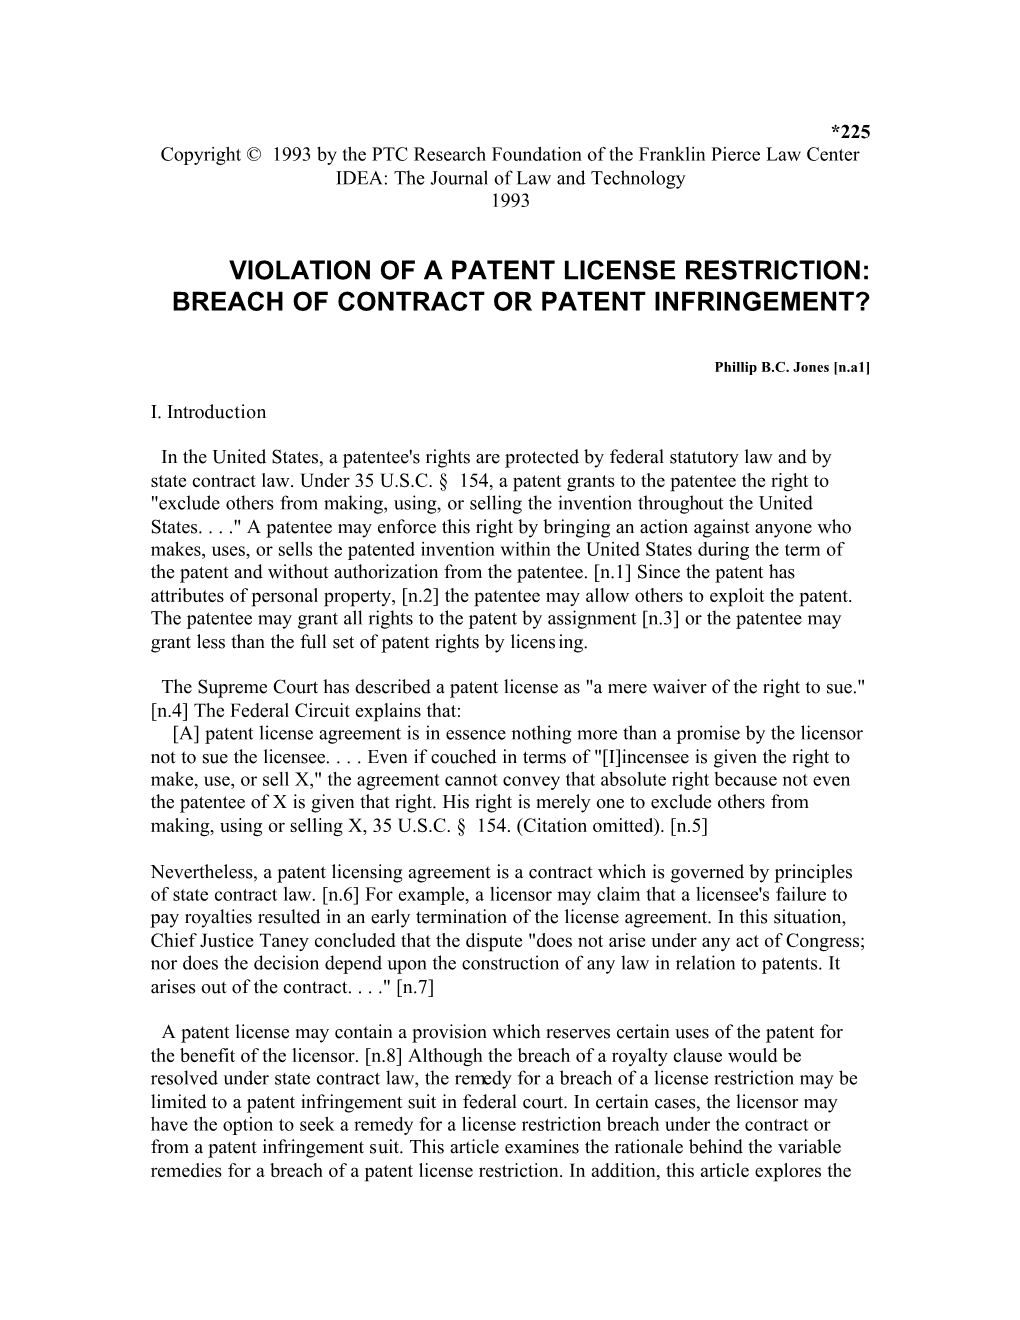 Breach of Contract Or Patent Infringement?